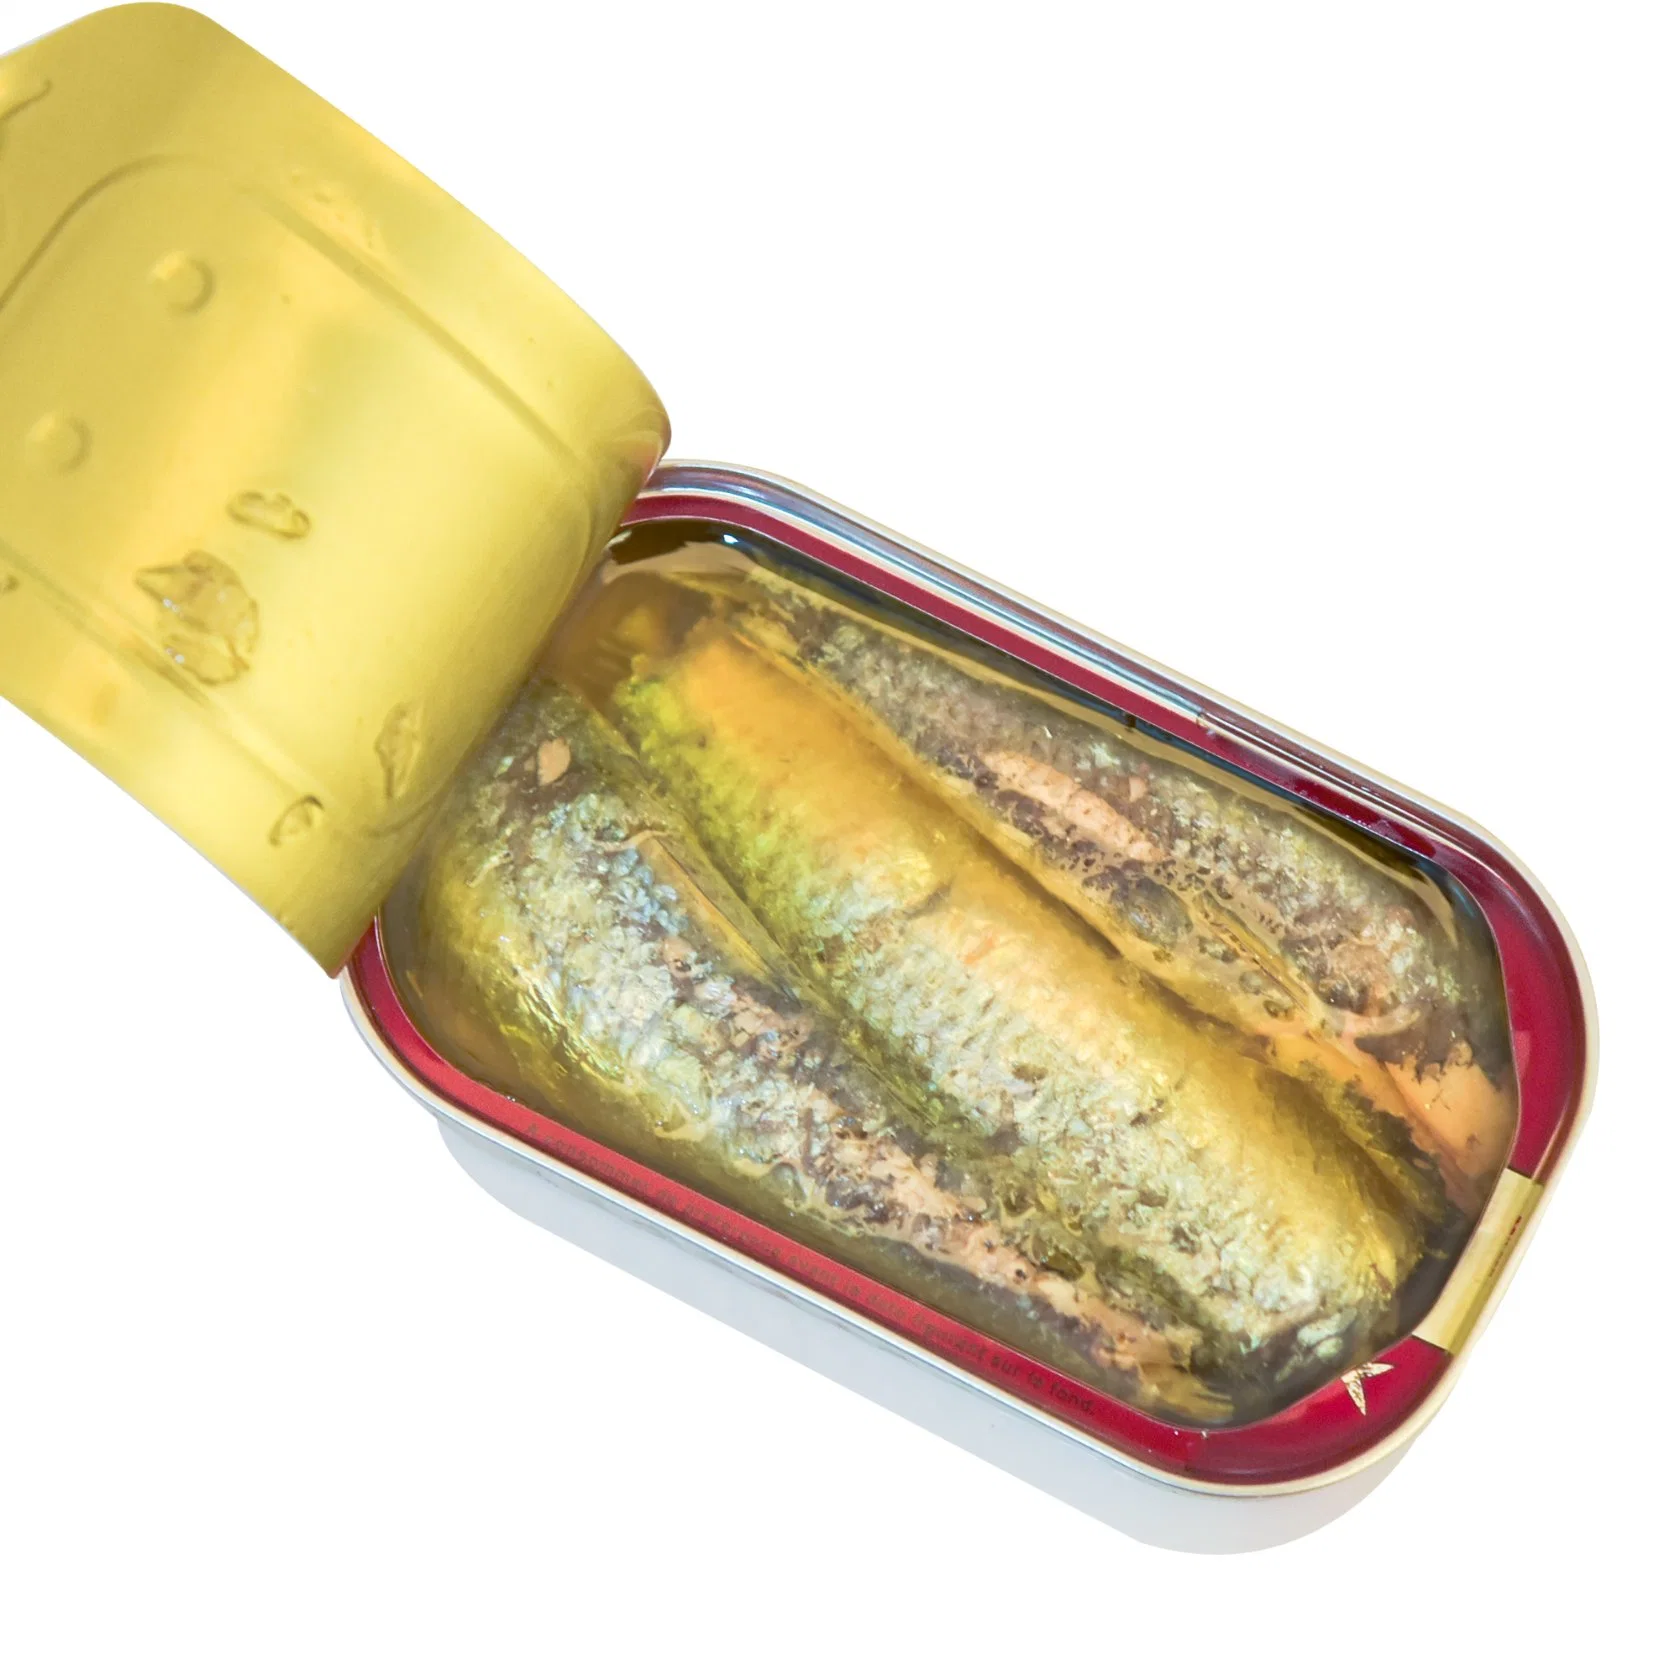 High Quality Sardine Canned Sardine in Oil Canned Seafood to Lome